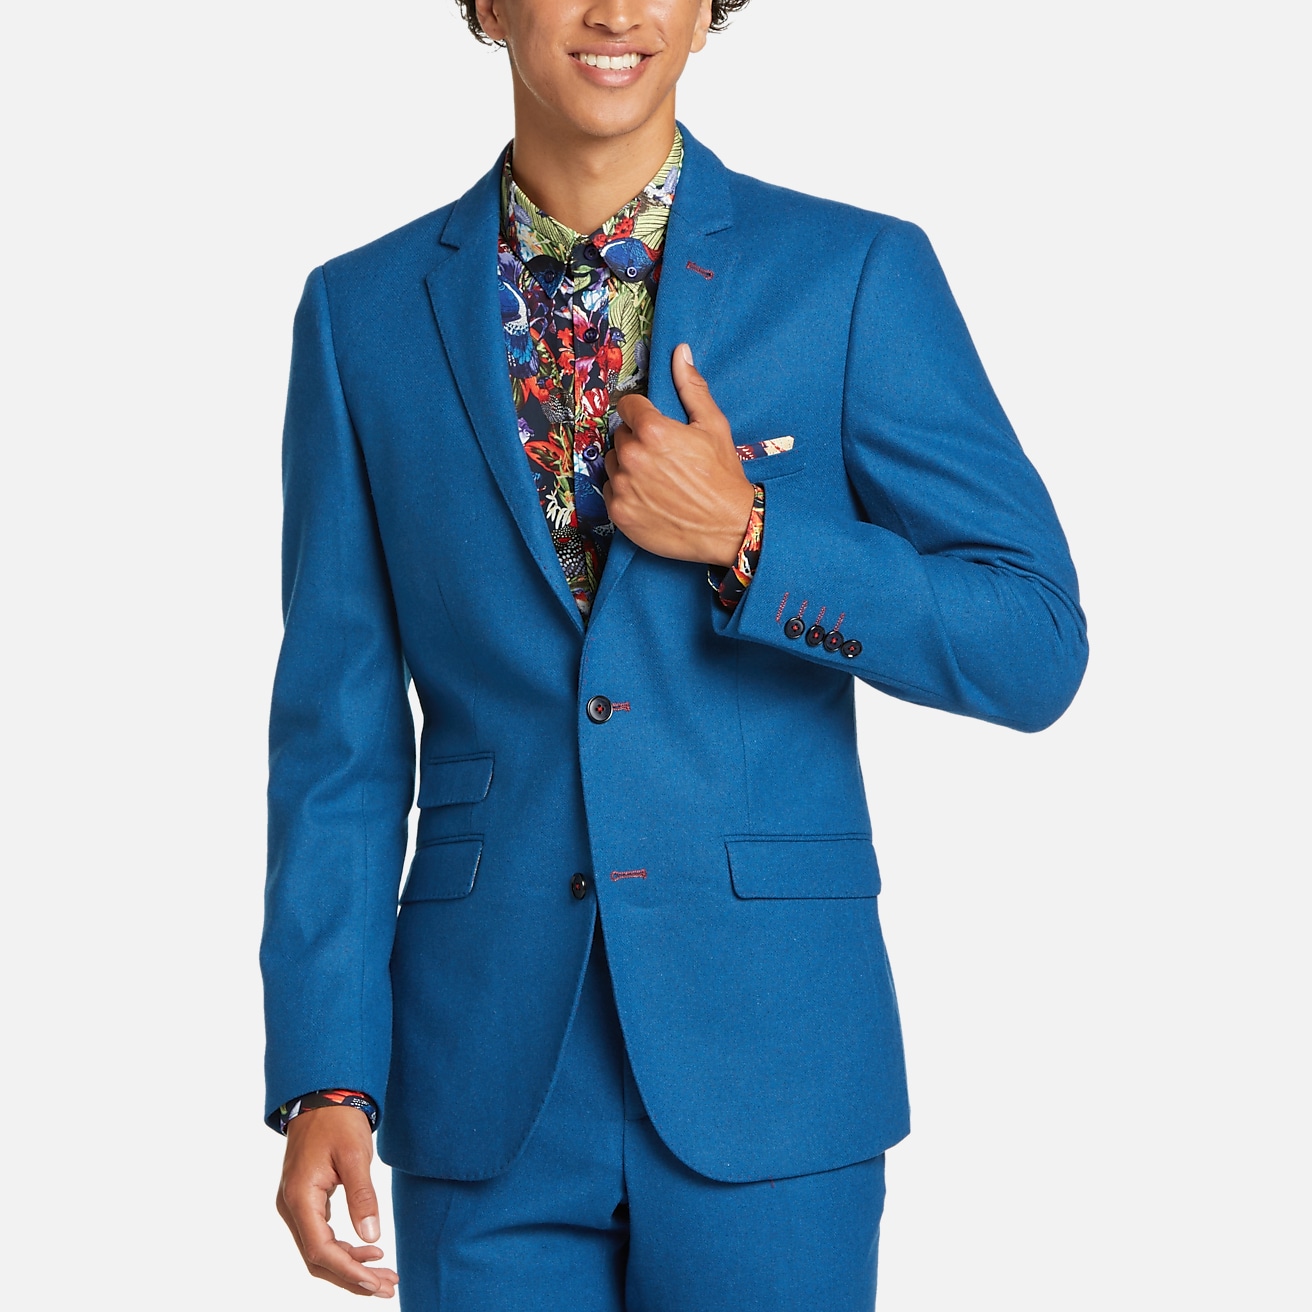 Traveler Collection Tailored Fit Suit Separate Jacket - Big & Tall  CLEARANCE - All Clearance